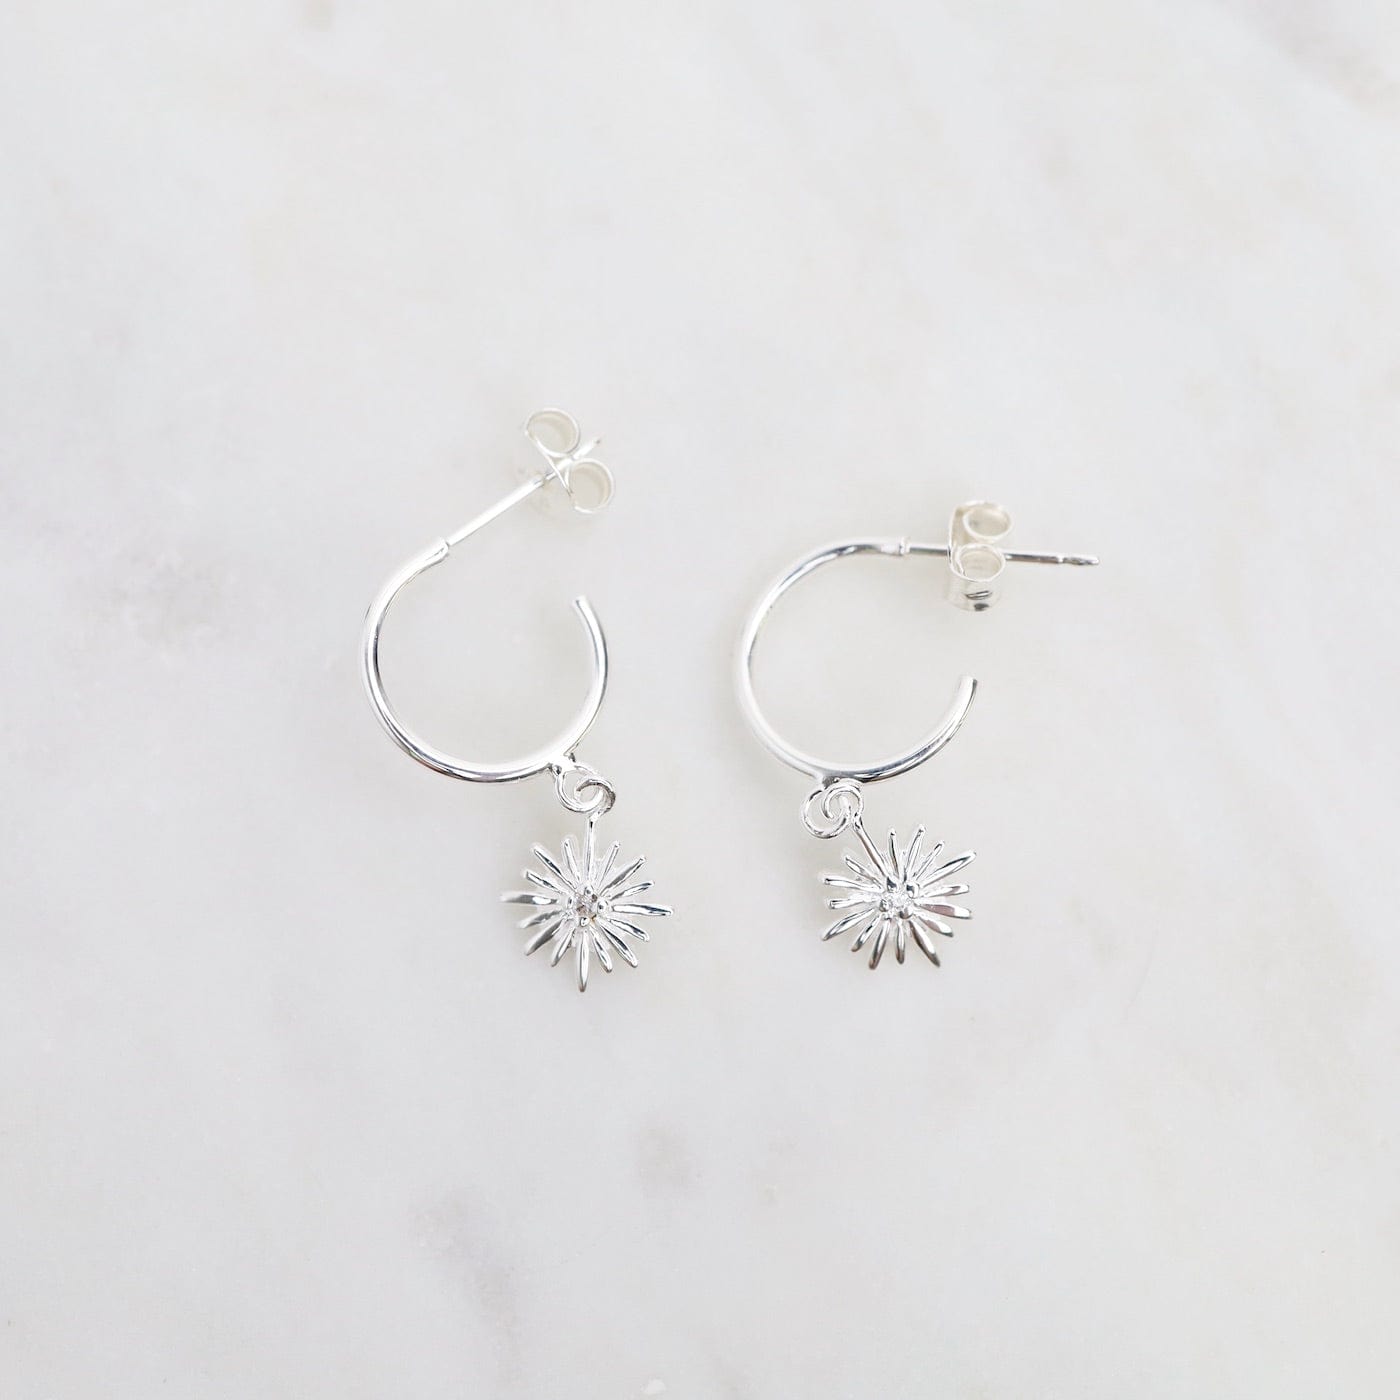 EAR Hoops with Hanging Sunburst - Sterling Silver